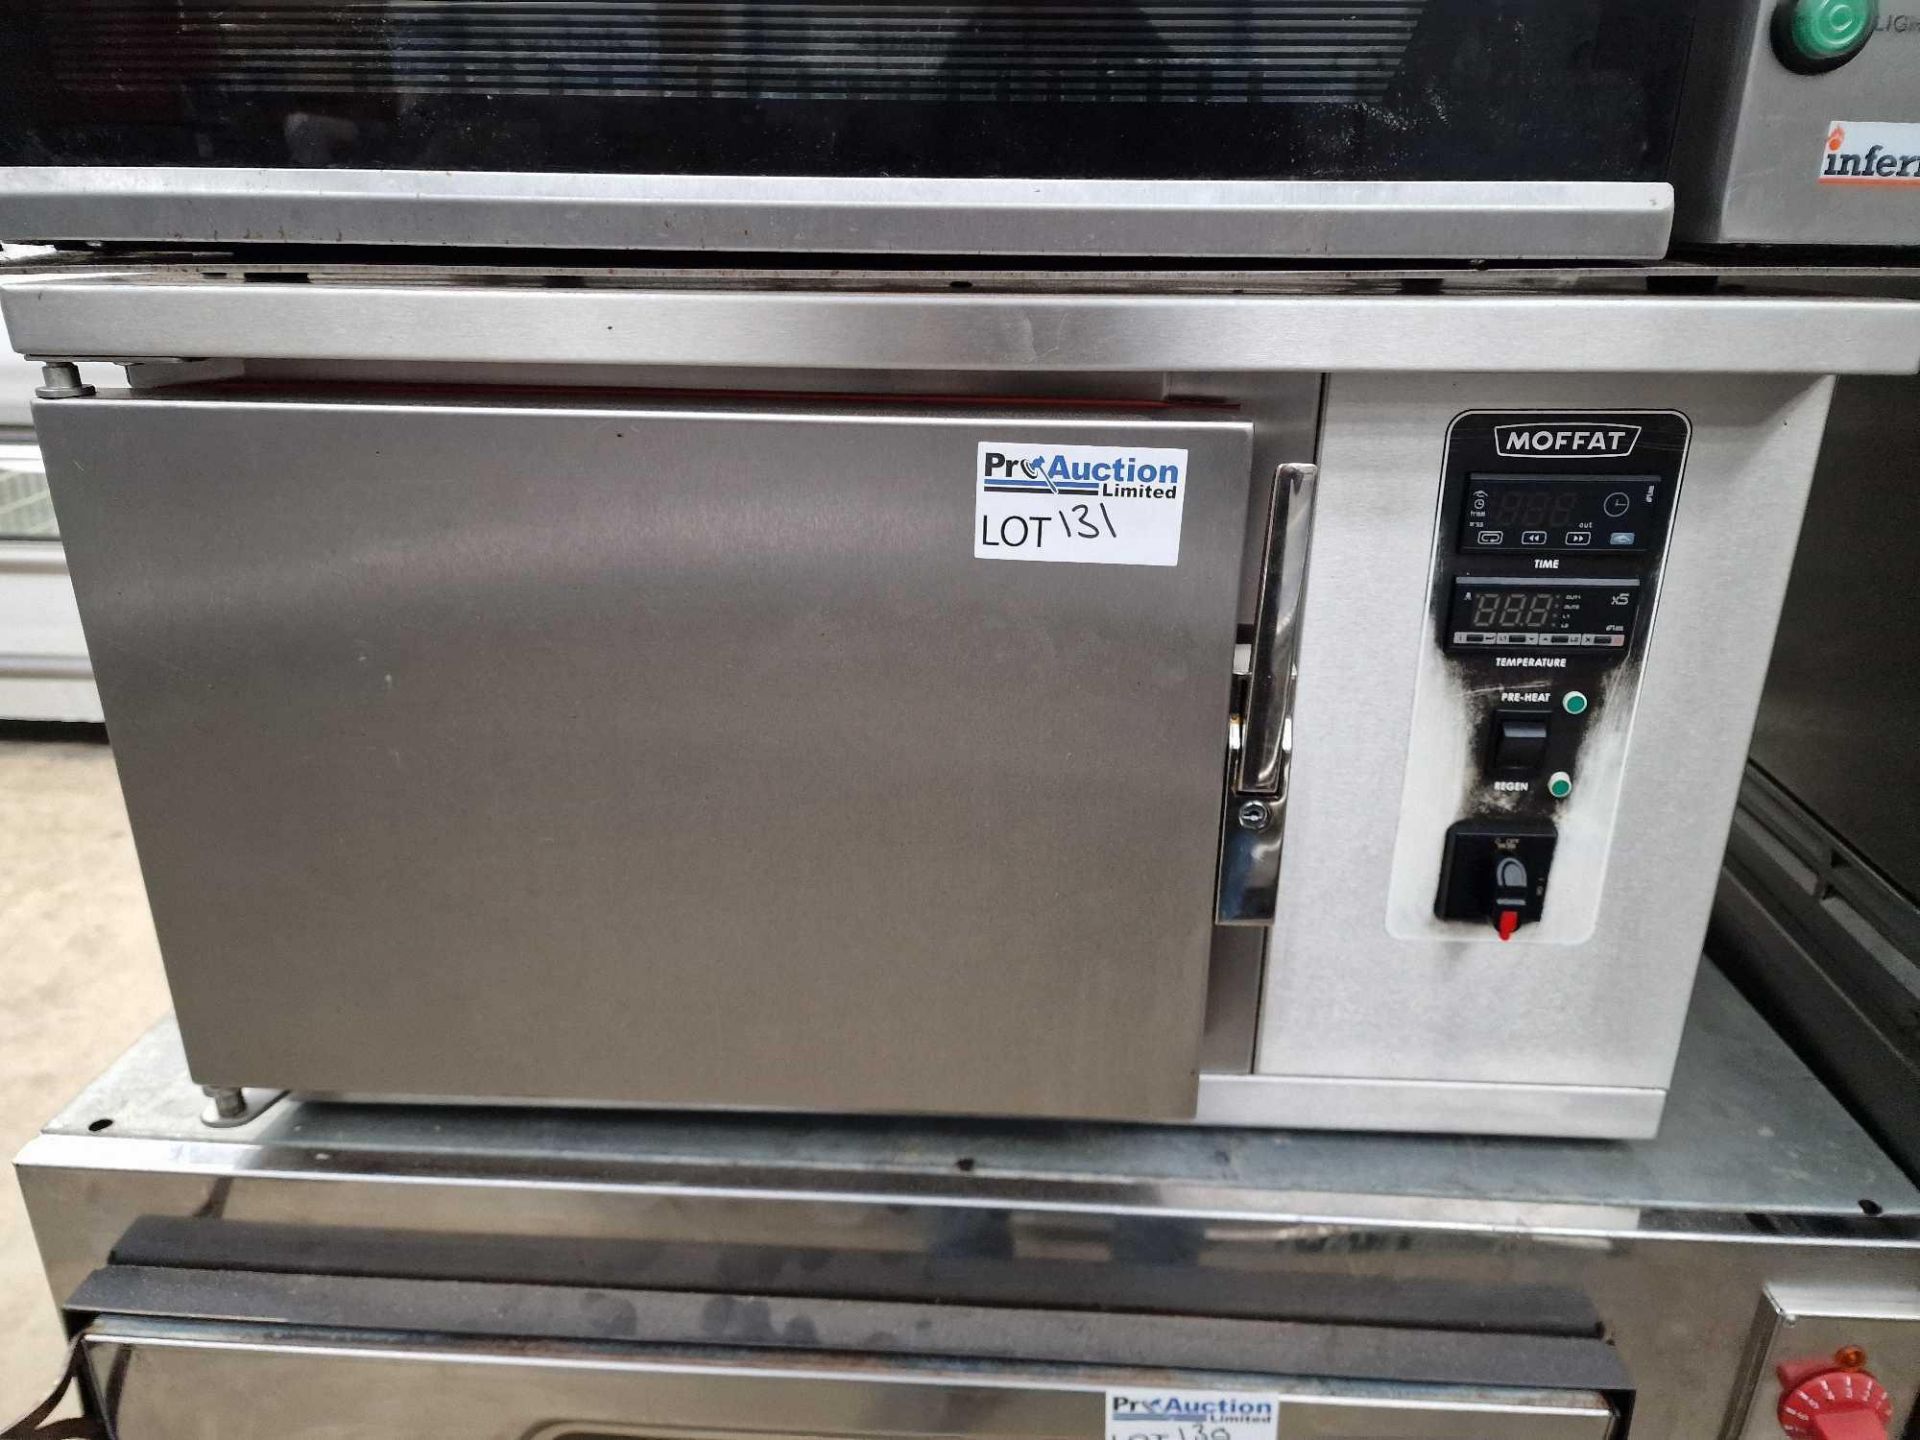 Moffat stainless steel Multi Purpose Convection Oven Designed specifically for the cooking and